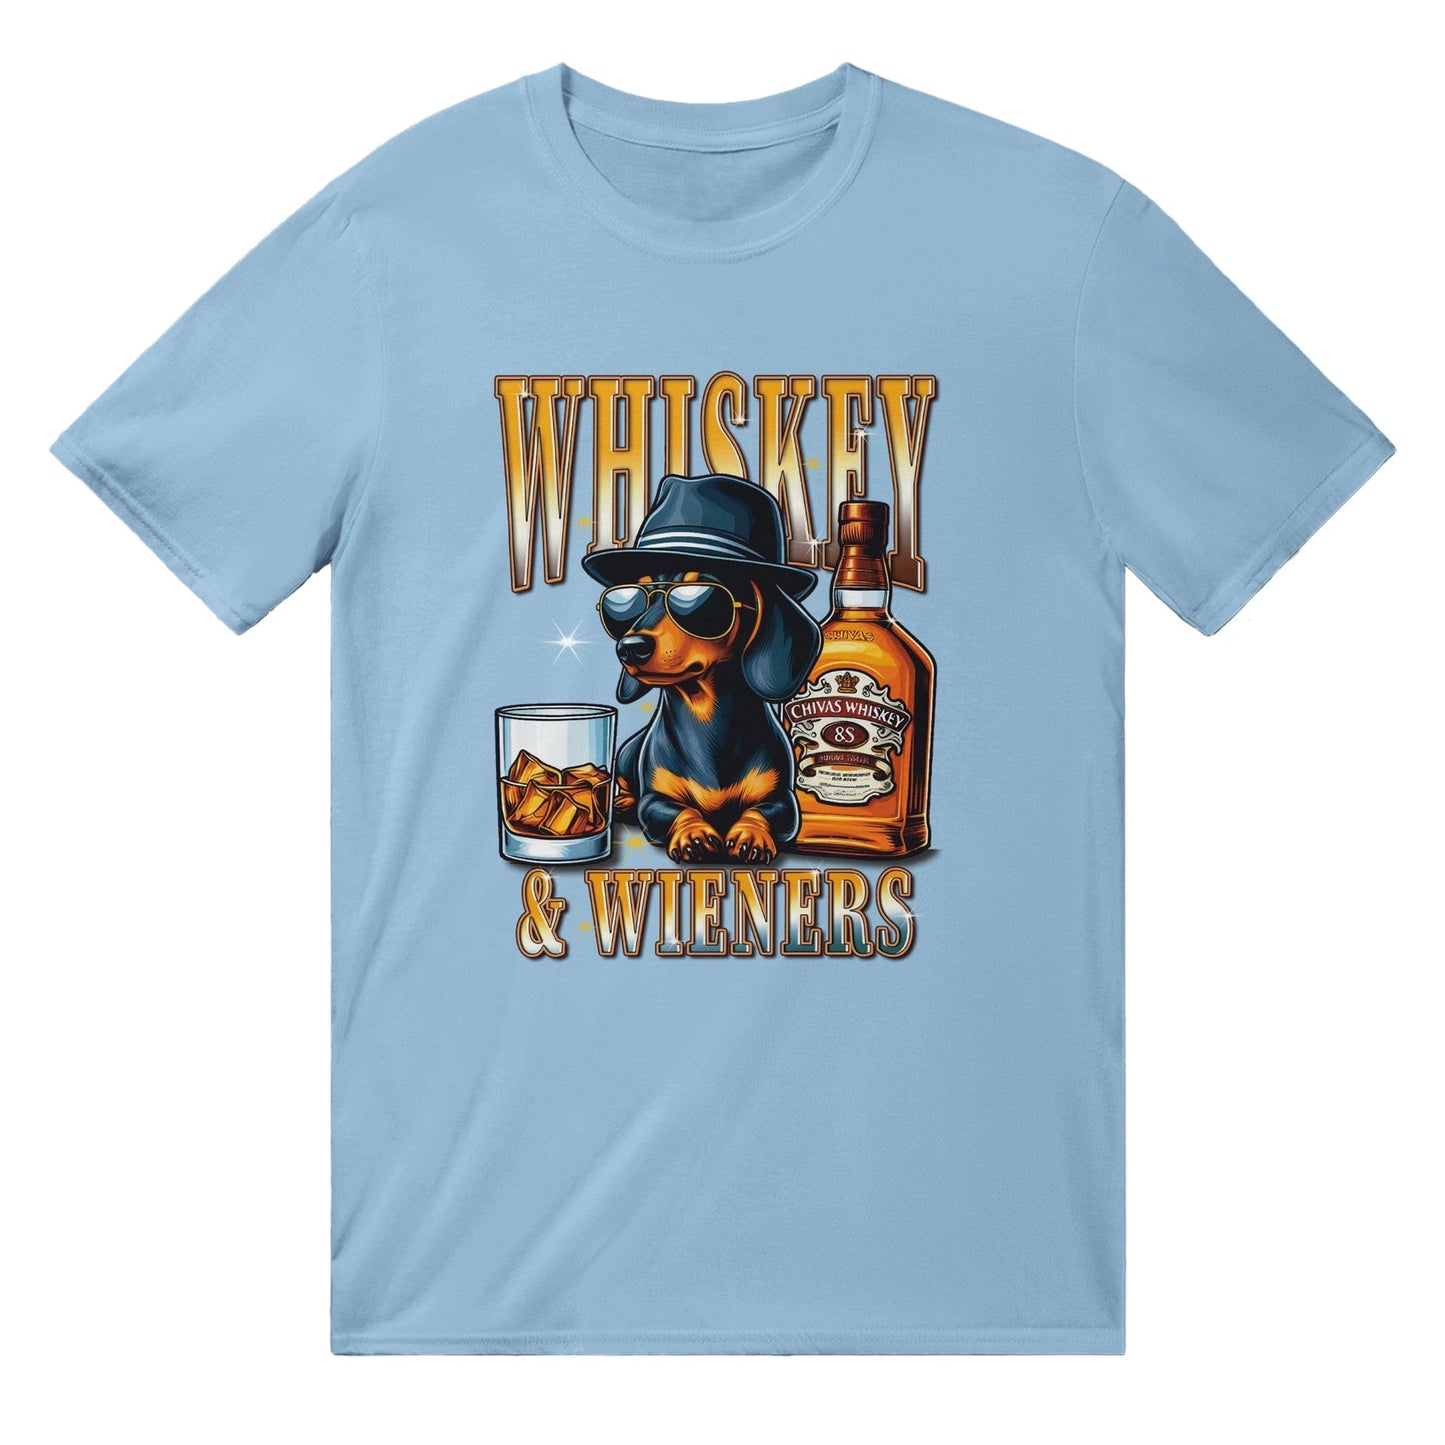 Whiskey And Wieners T-Shirt Graphic Tee Light Blue / S BC Australia